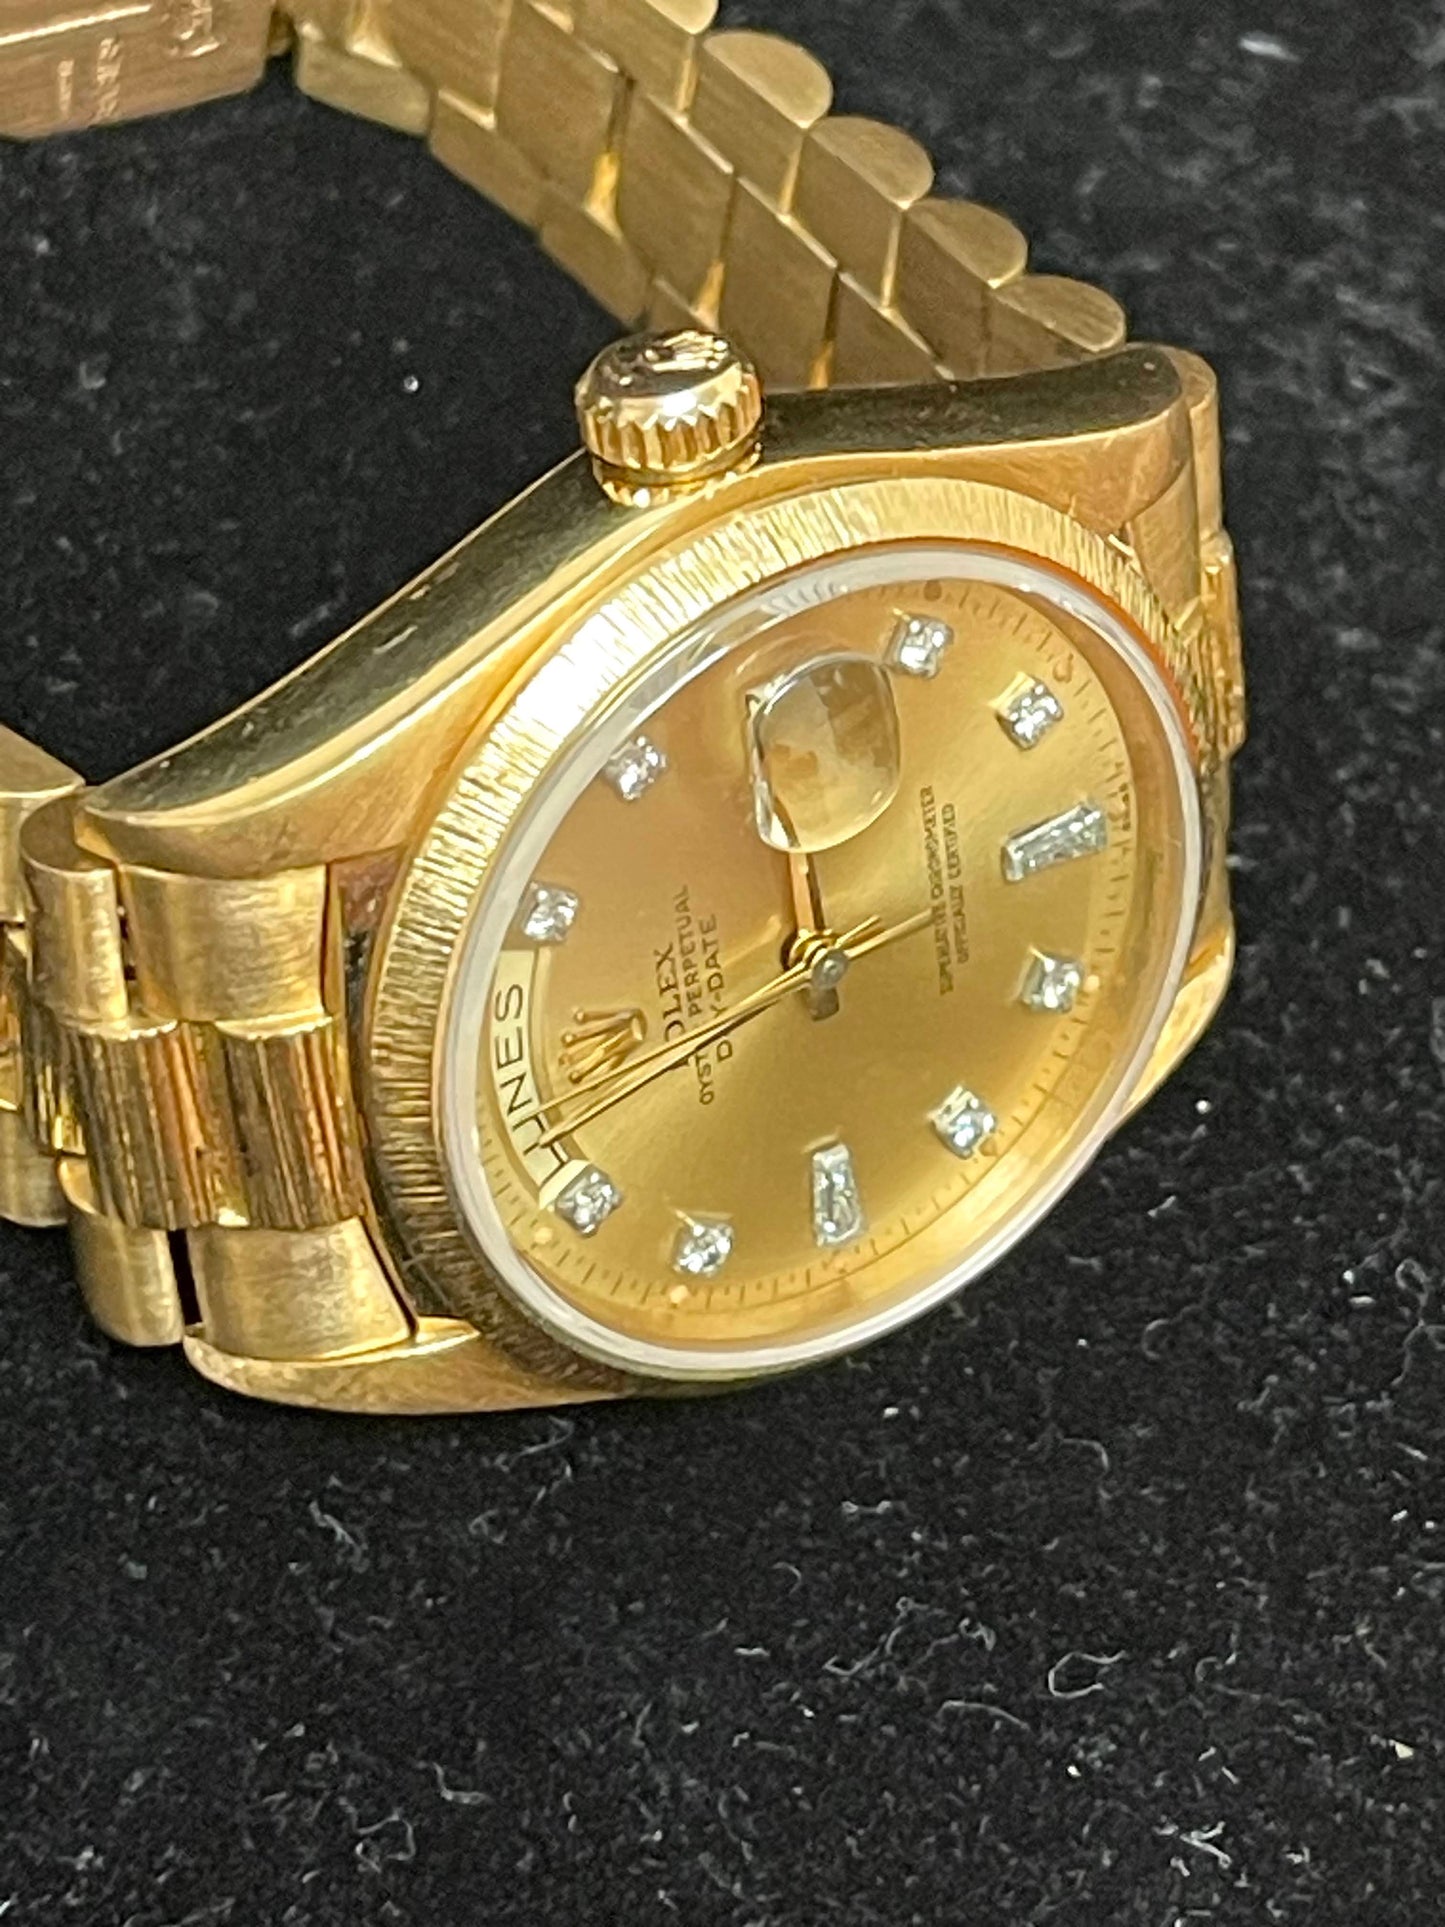 1979 Rolex Day-Date 18078 Champagne Diamond Dial Spanish Datewheel No Papers 36